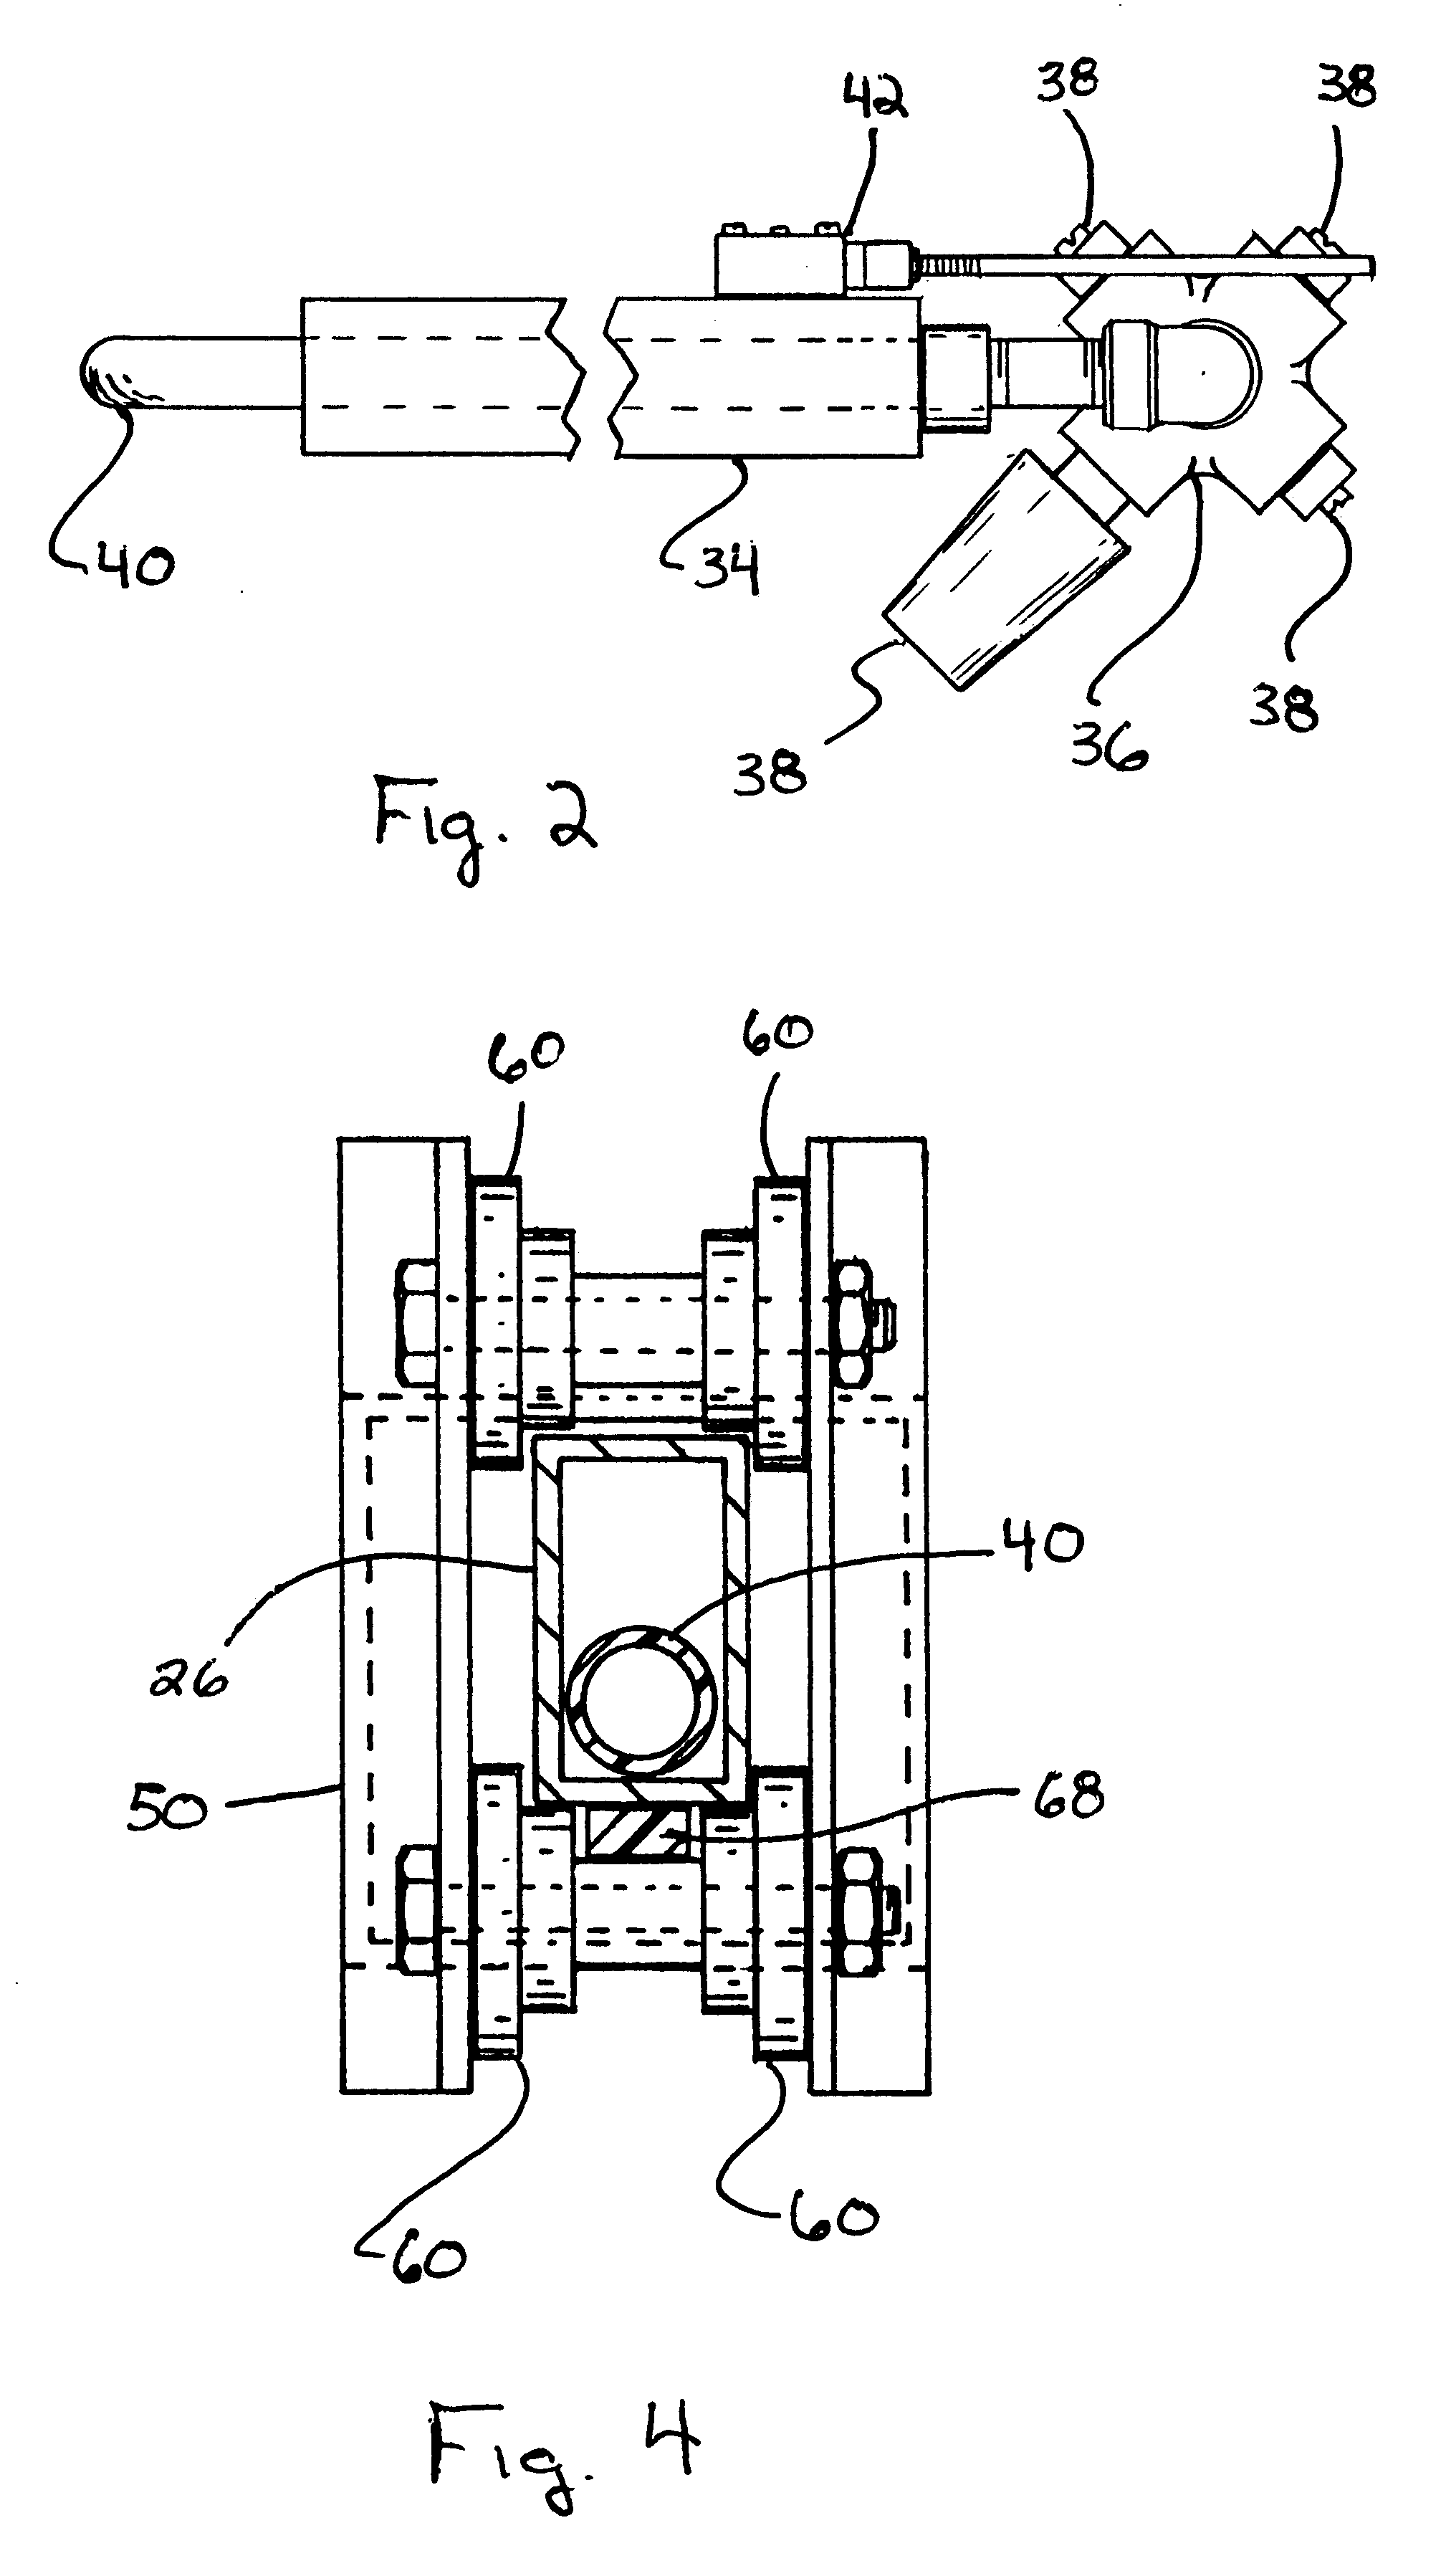 Apparatus and method for removing concrete from interior surfaces of a concrete mixing drum